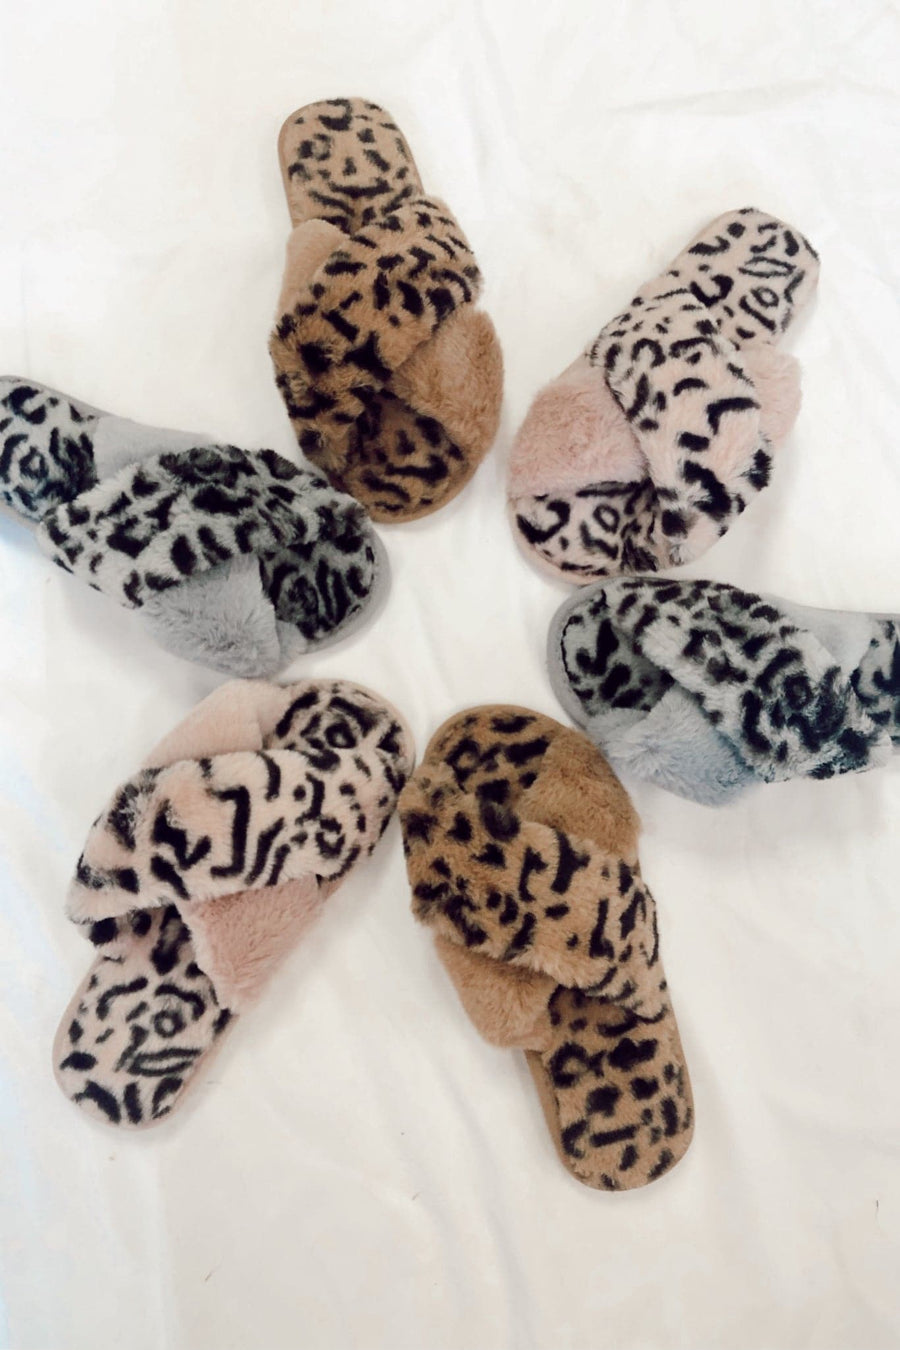  Namastae in Bed Animal Print Criss Cross Slippers - FINAL SALE - Madison and Mallory